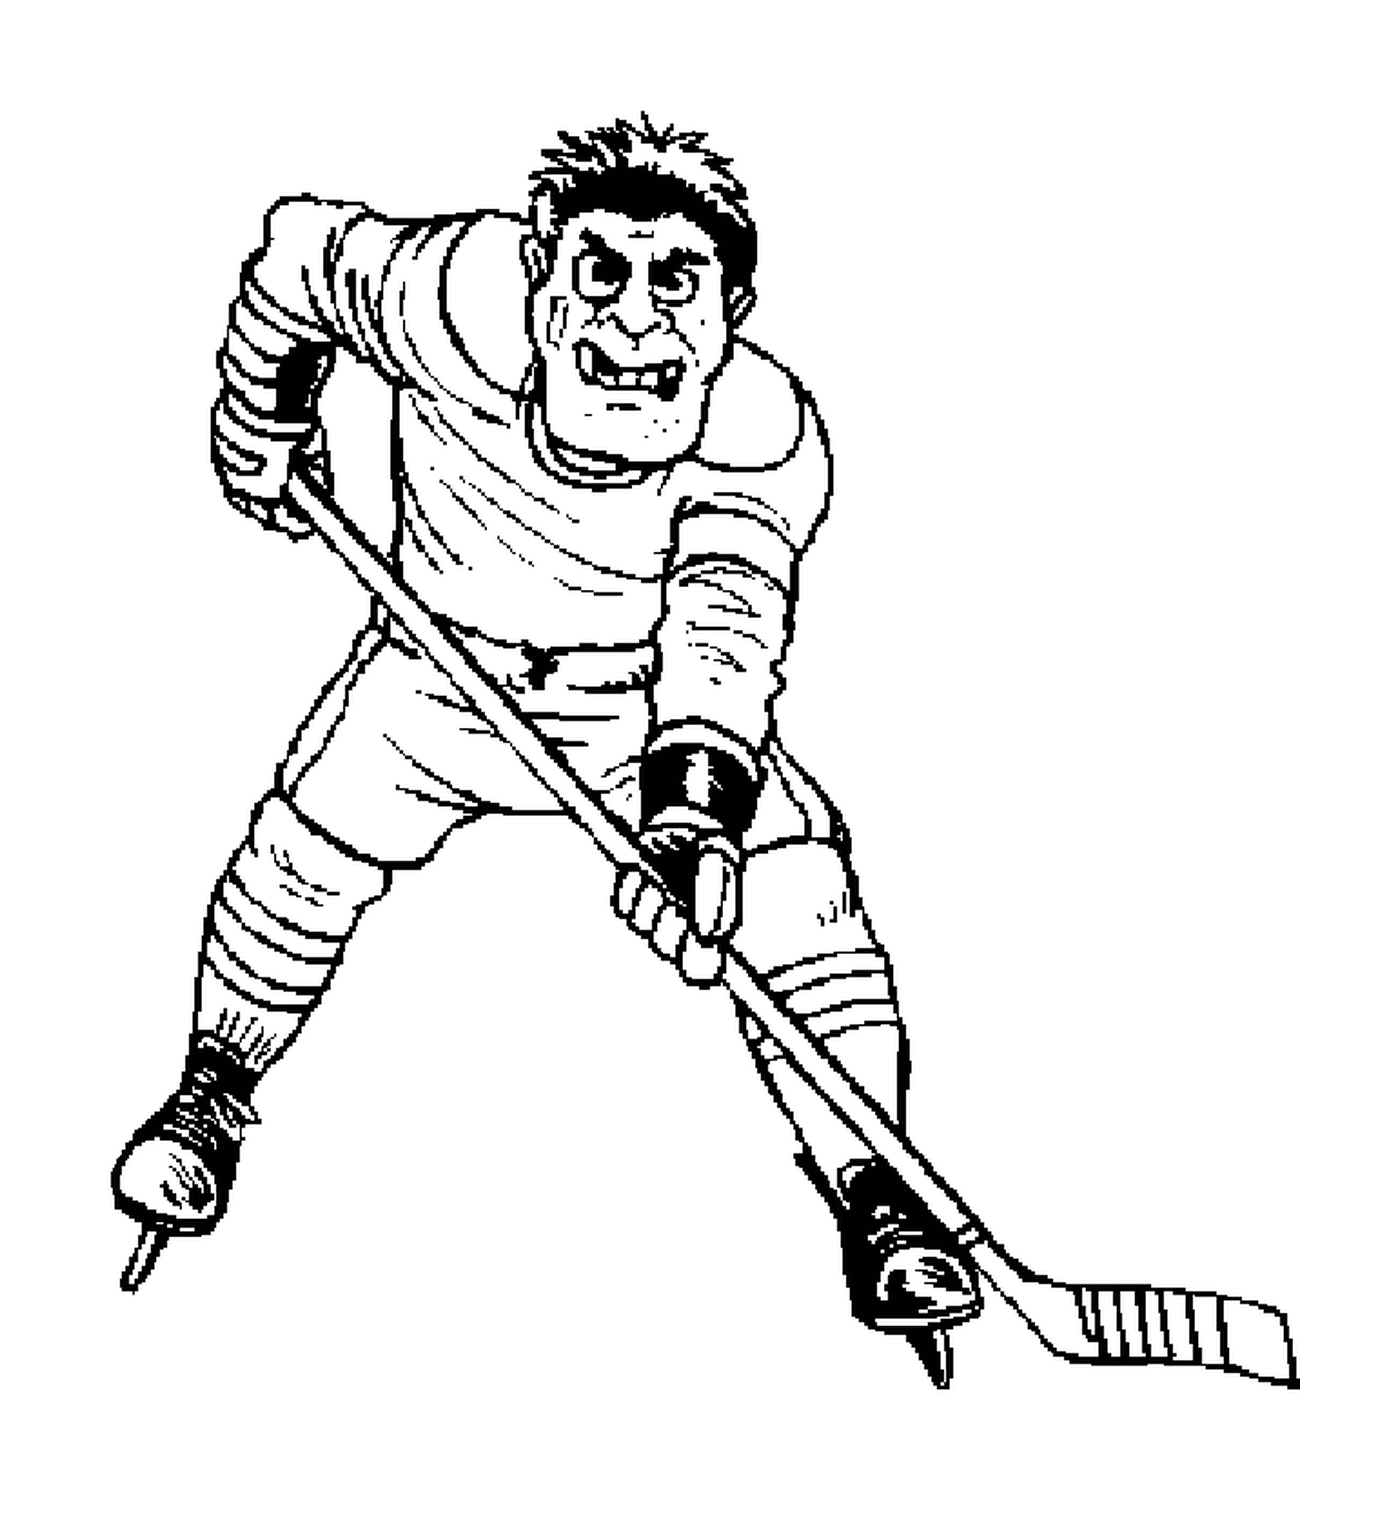  Specified hockey player 